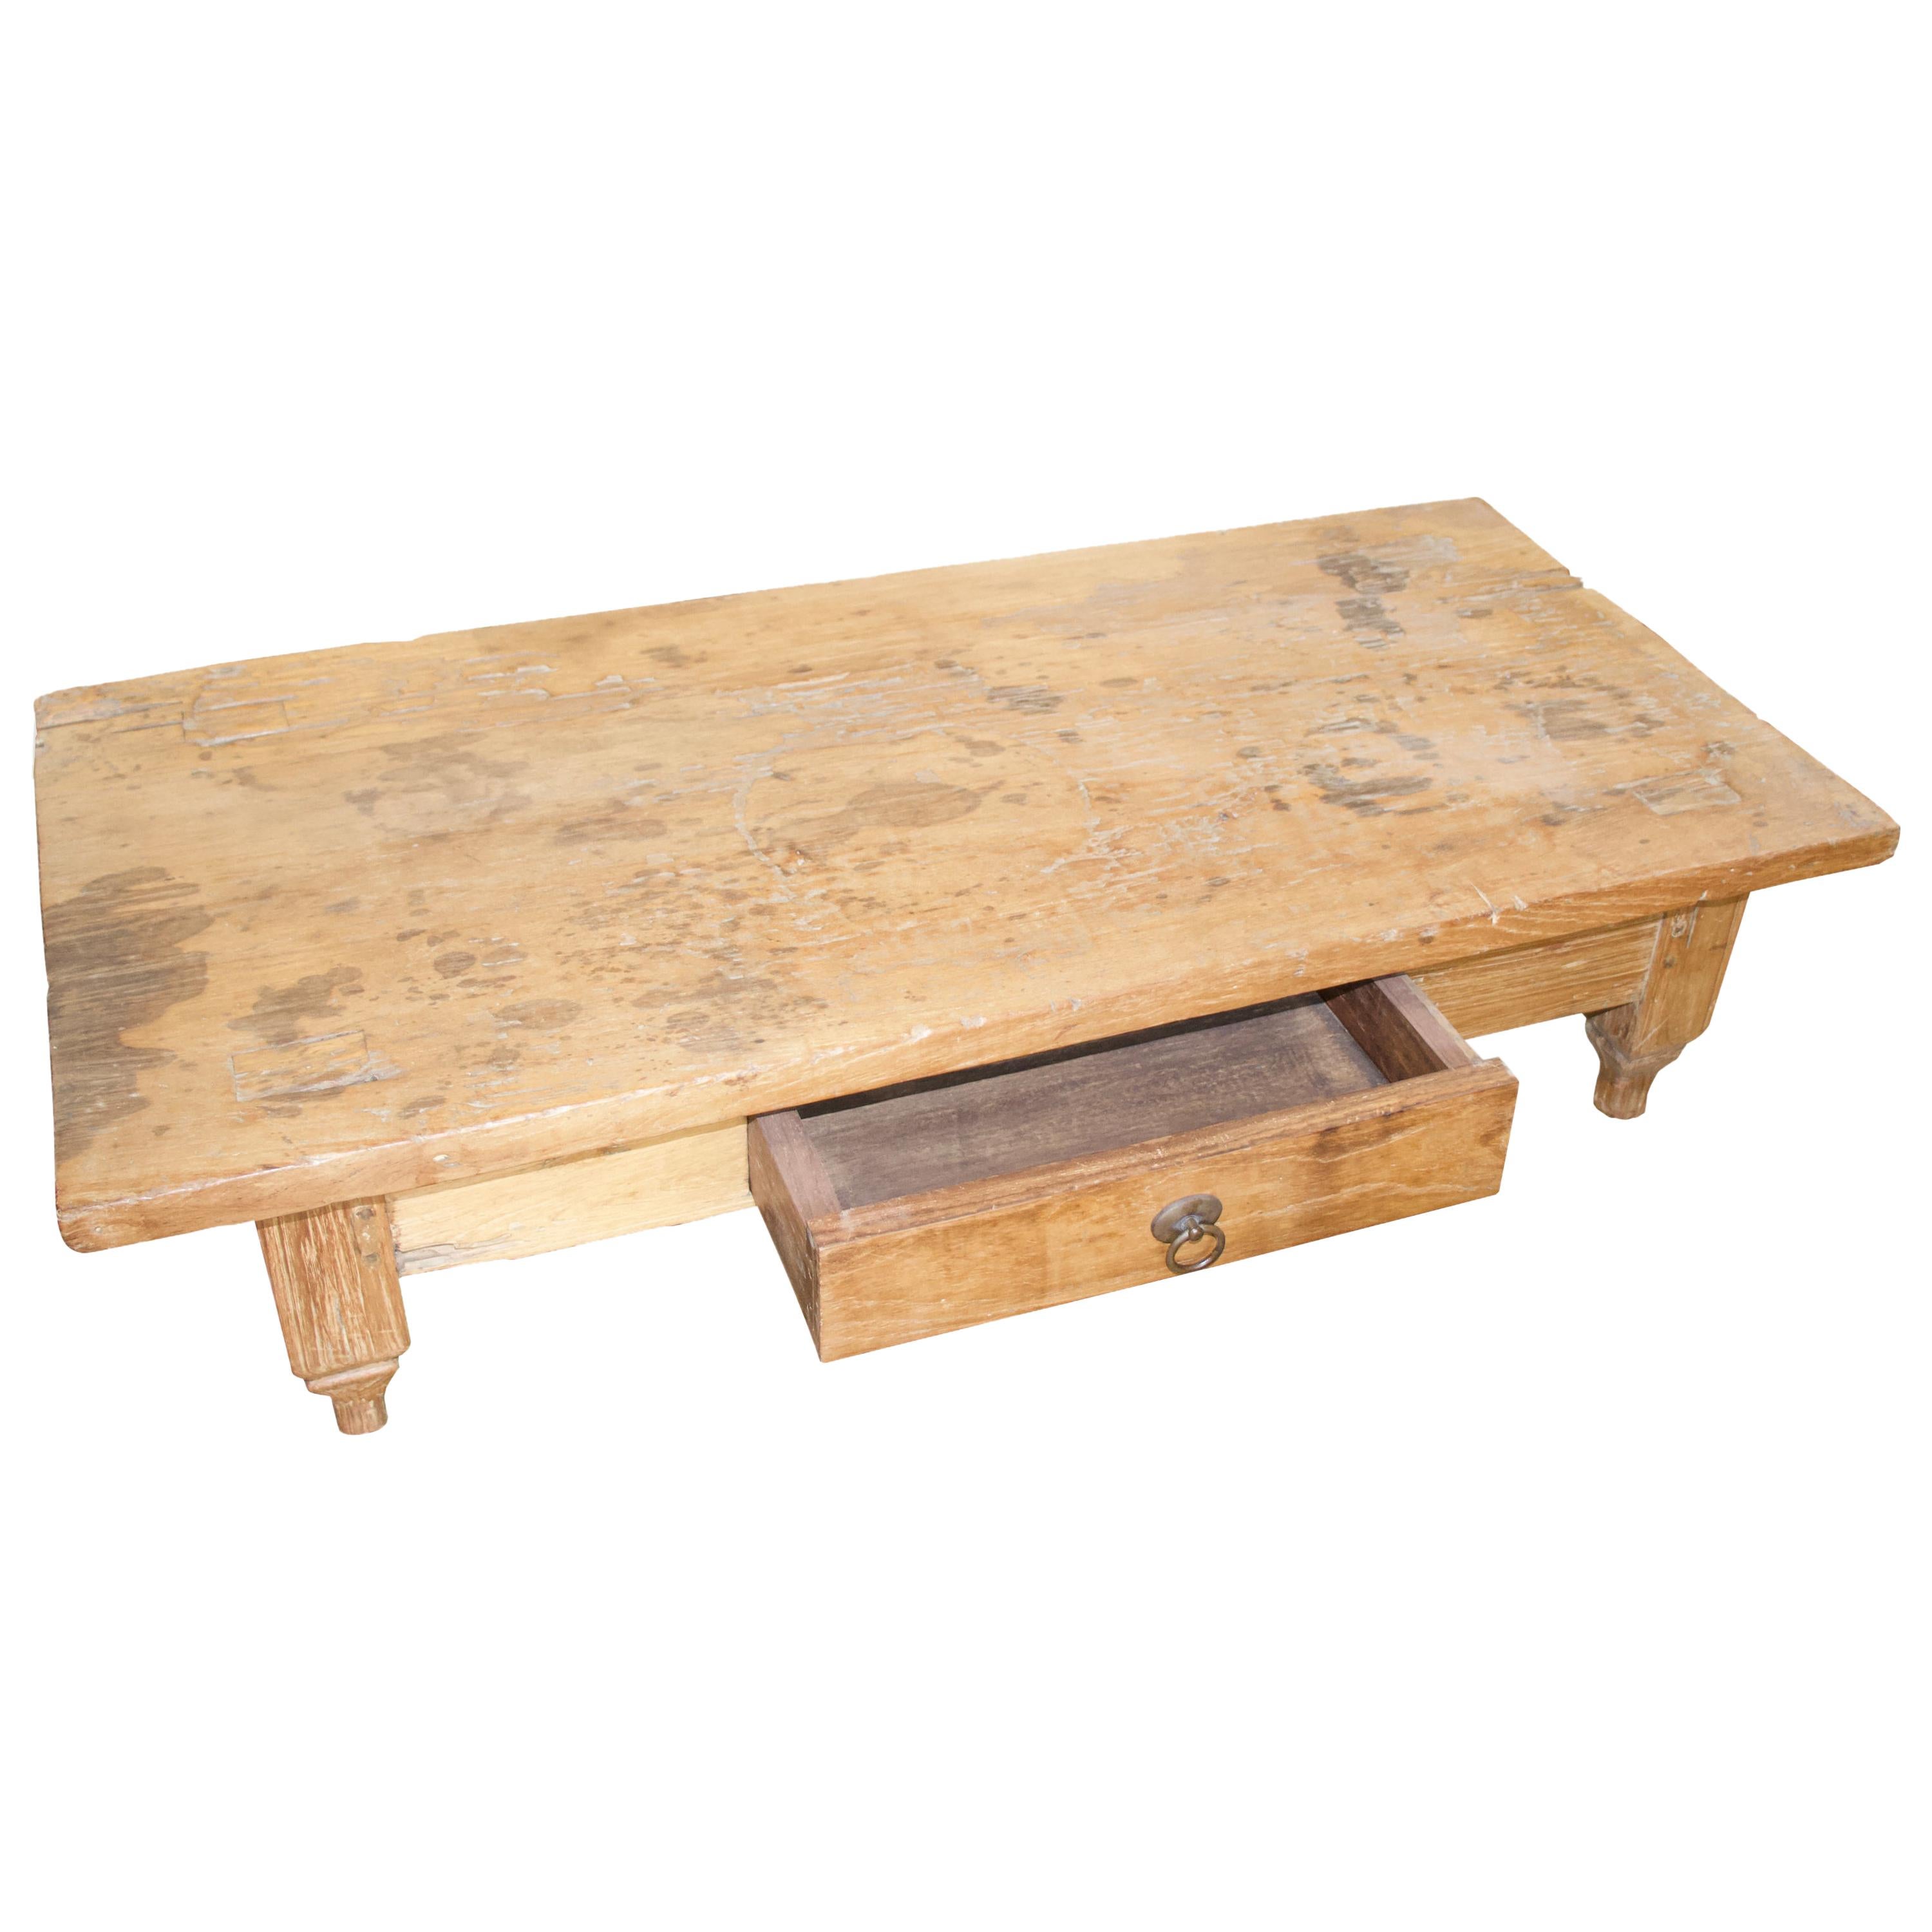 Antique coffee table with a single drawer and the top made from a single slab of natural aged teak. This low profile coffee table celebrates cracks and crevices and all the other marks that time and loving use have left behind.

This table was